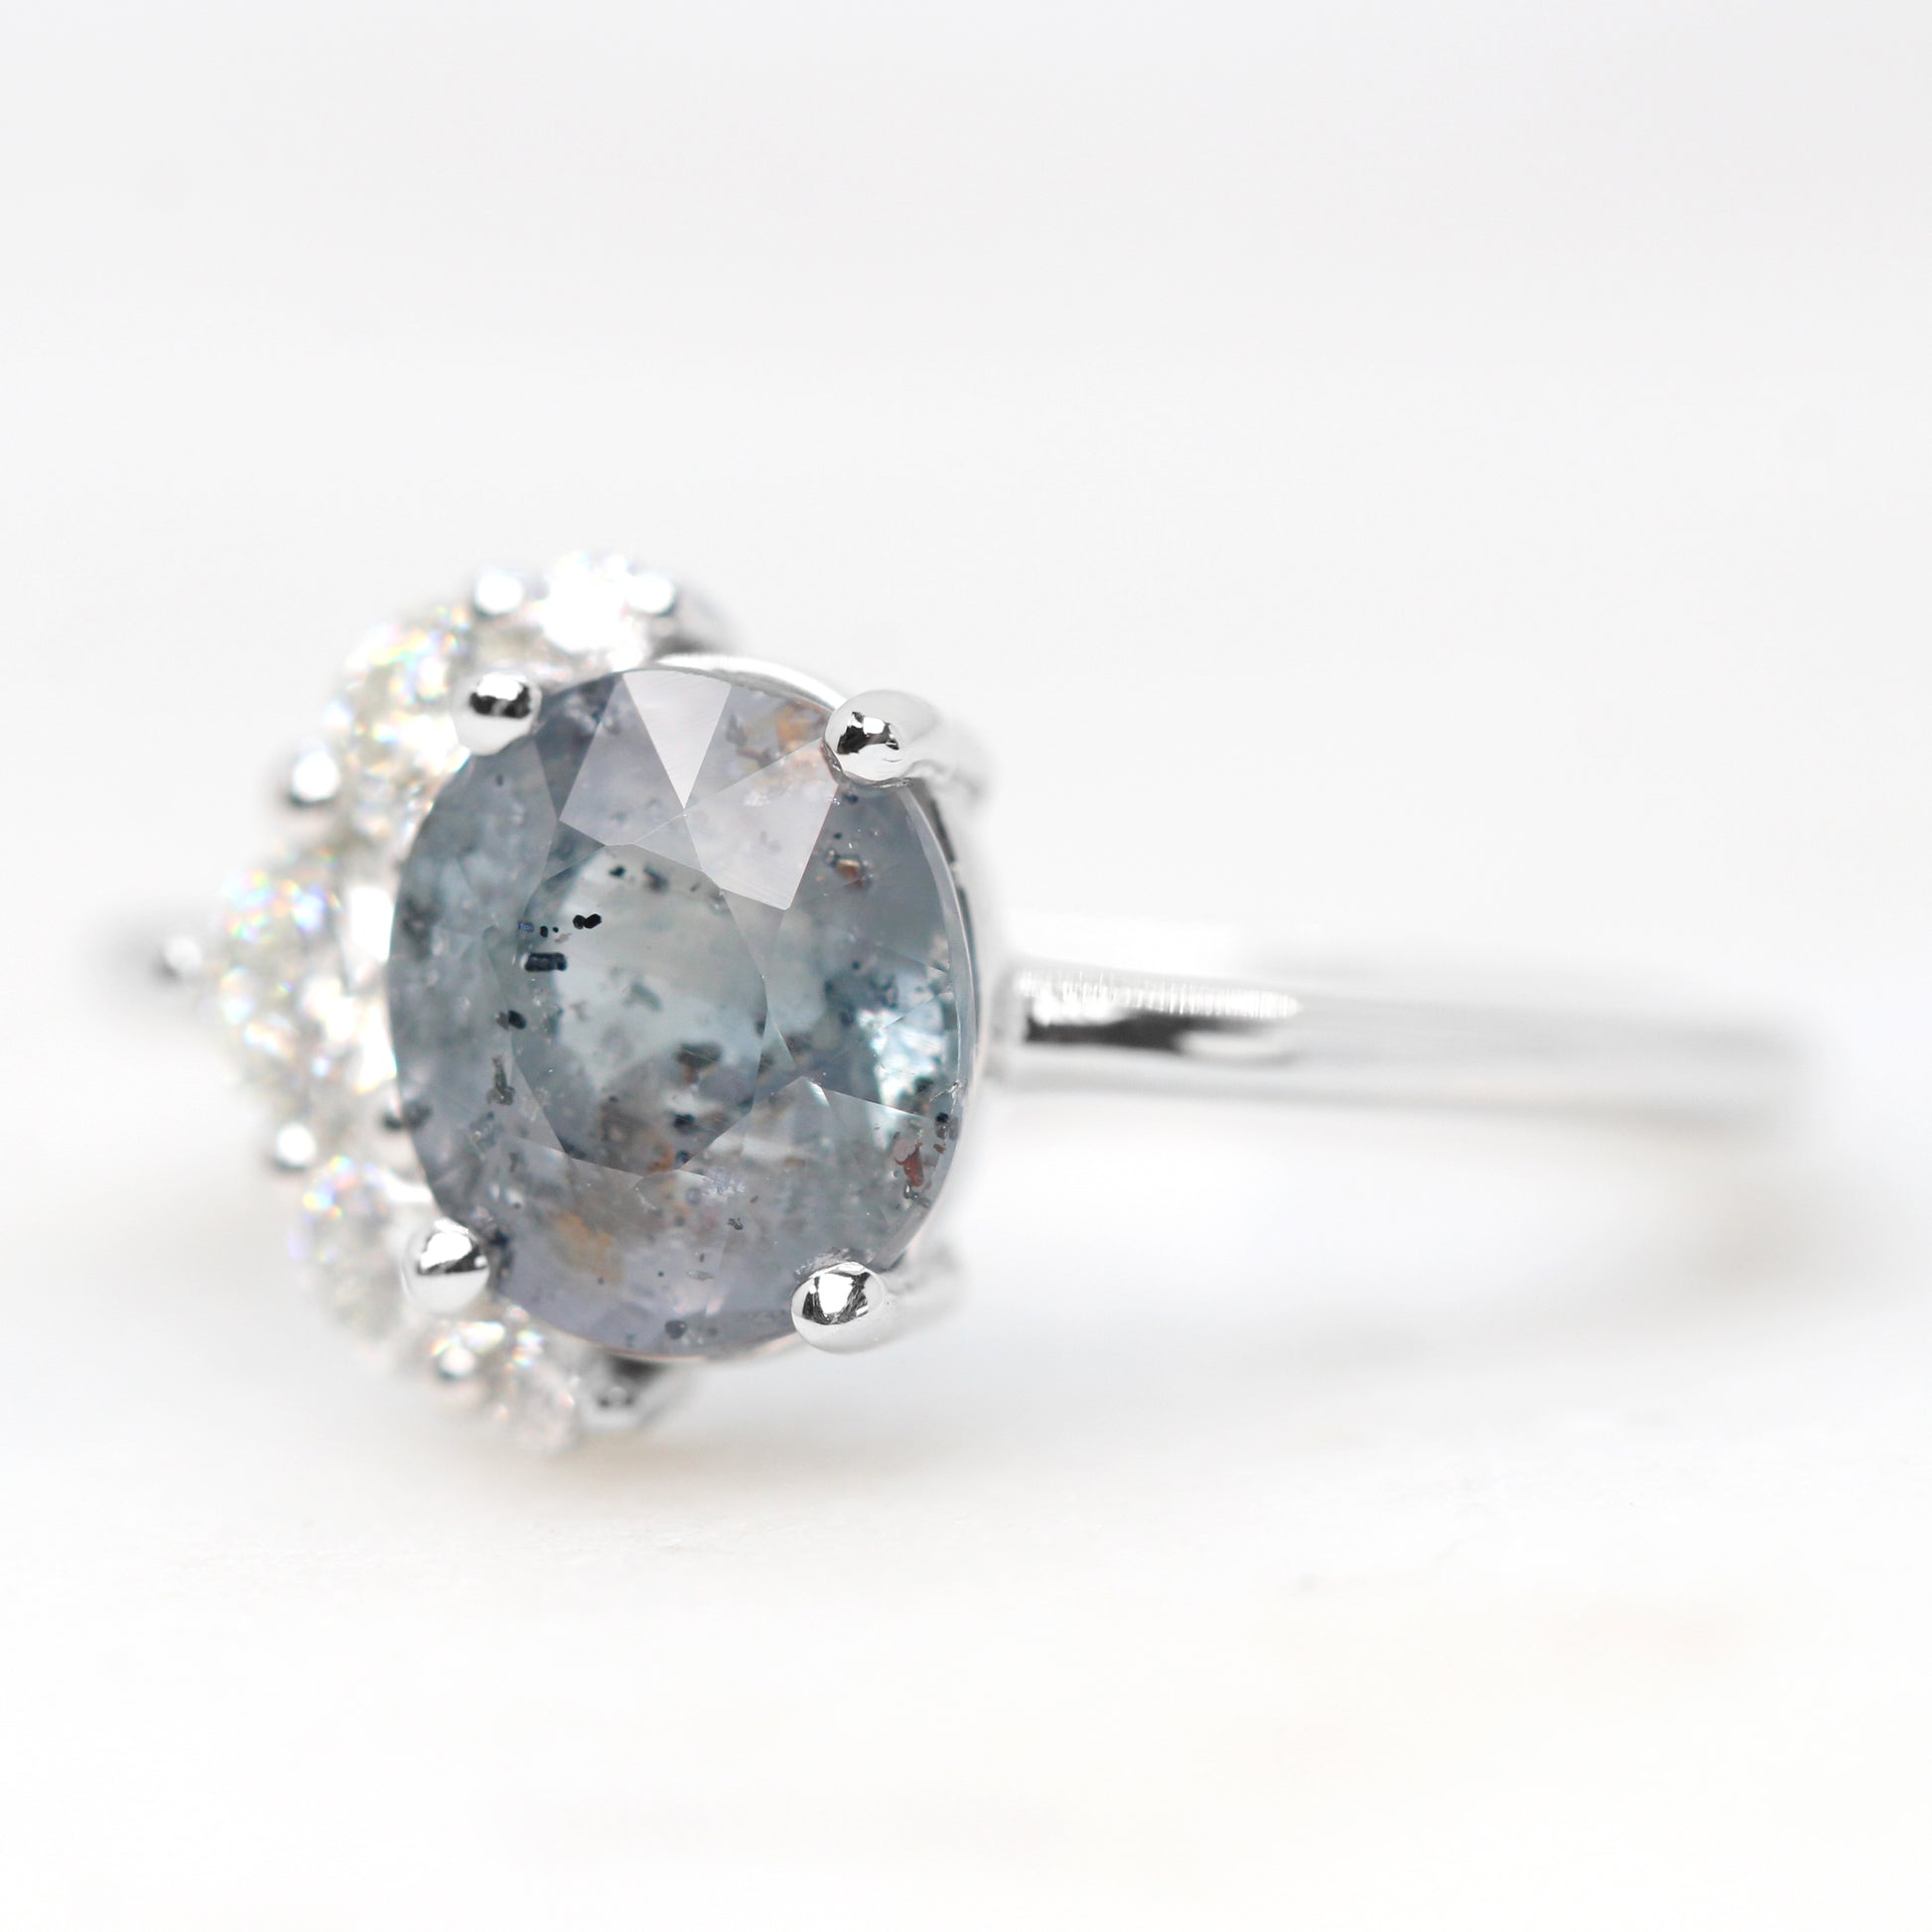 Carell Ring with a 2.11 Carat Light Blue Gray Oval Sapphire and White Accent Diamonds in 14k White Gold - Ready to Size and Ship - Midwinter Co. Alternative Bridal Rings and Modern Fine Jewelry